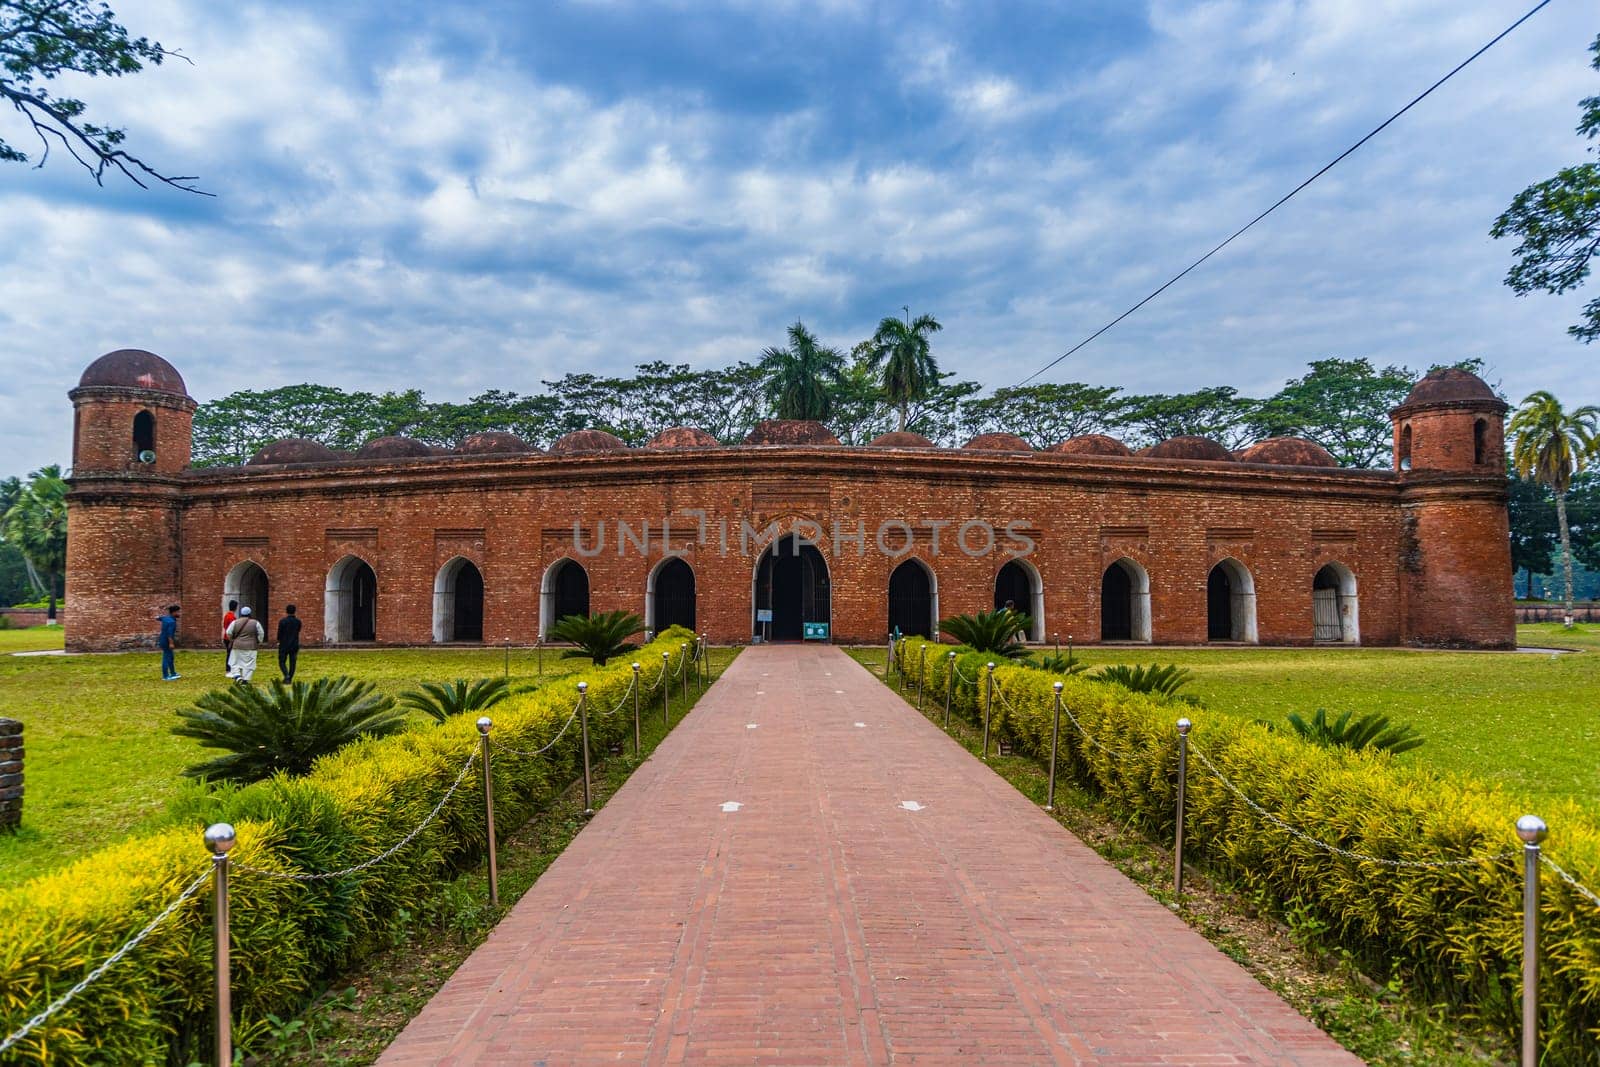 The Sixty Dome Mosque in  Khulna, Bangladesh, Selective Focus by abdulkayum97